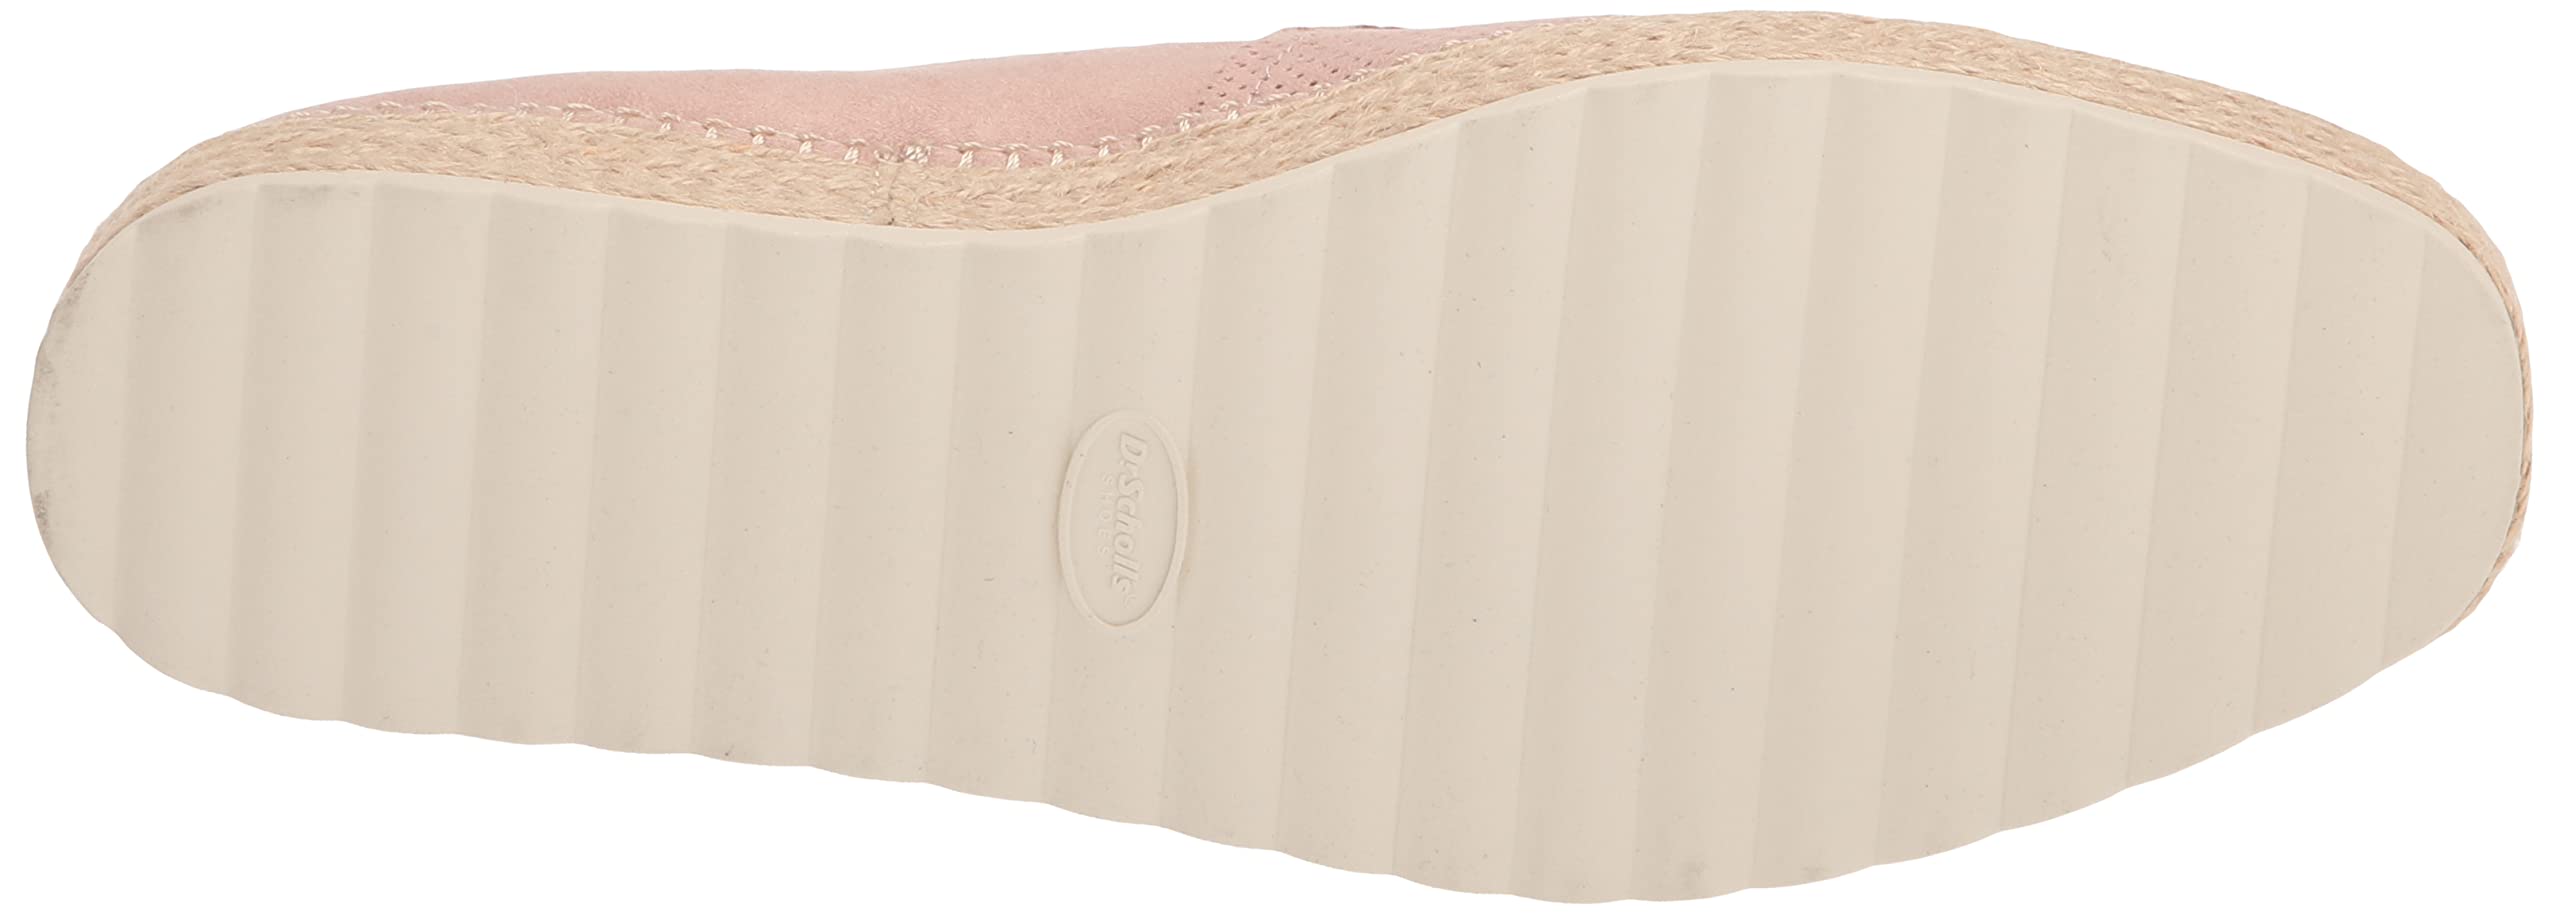 Dr. Scholl's Shoes Women's Sunray Espadrilles Loafer